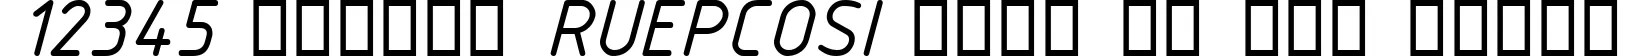 Dynamic ISOCPEUR Italic Font Preview https://safirsoft.com